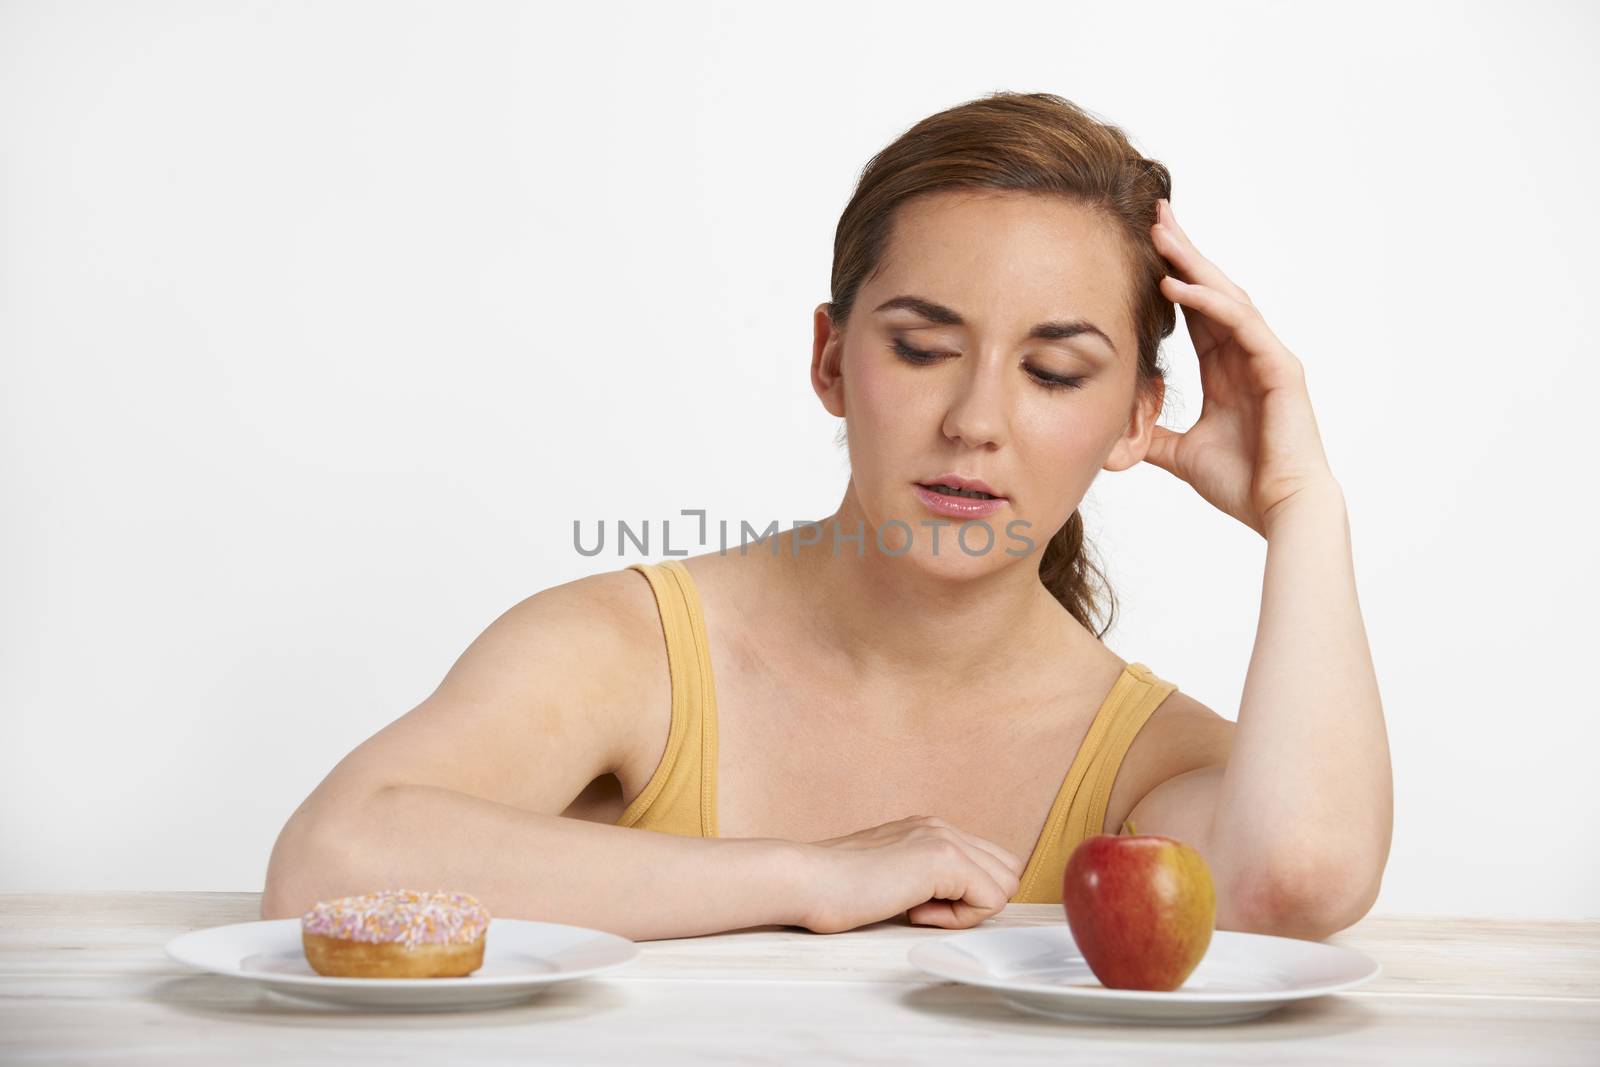 Woman Choosing Between Apple And Doughnut For Snack